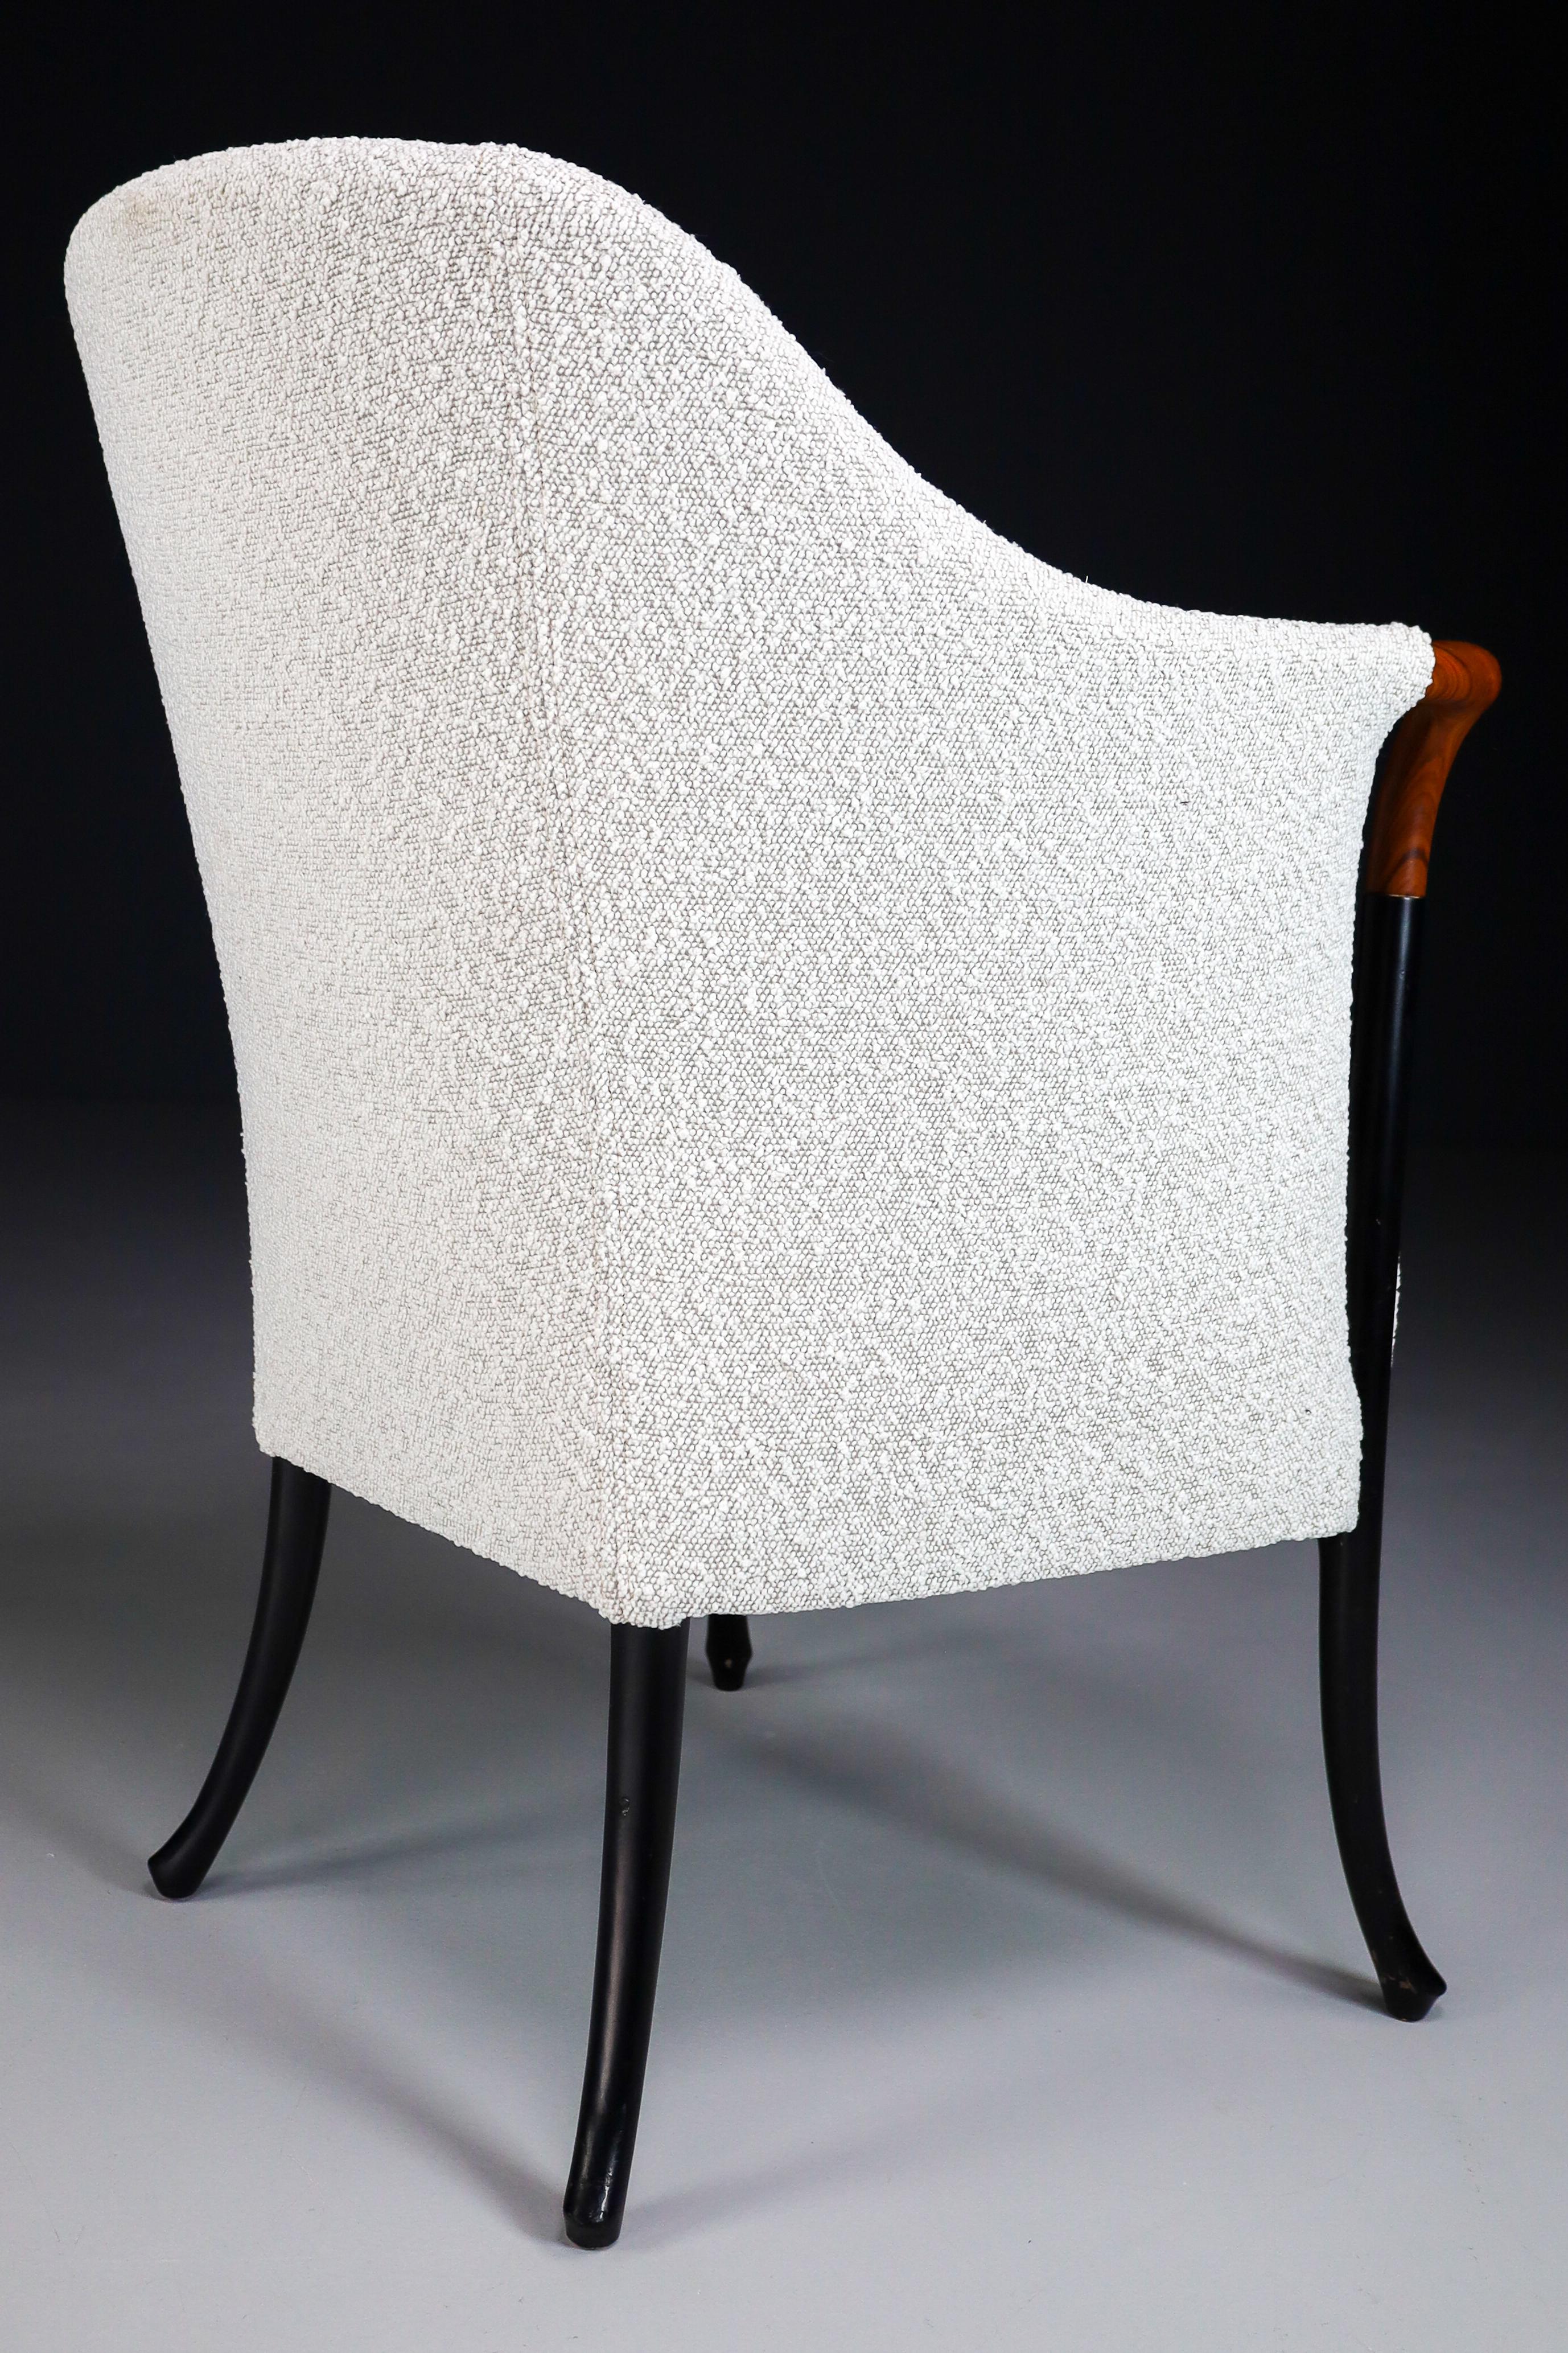 20th Century Progetti Armchair by Umberto Asnago for Giorgetti in Bouclé Wool Fabric, Italy